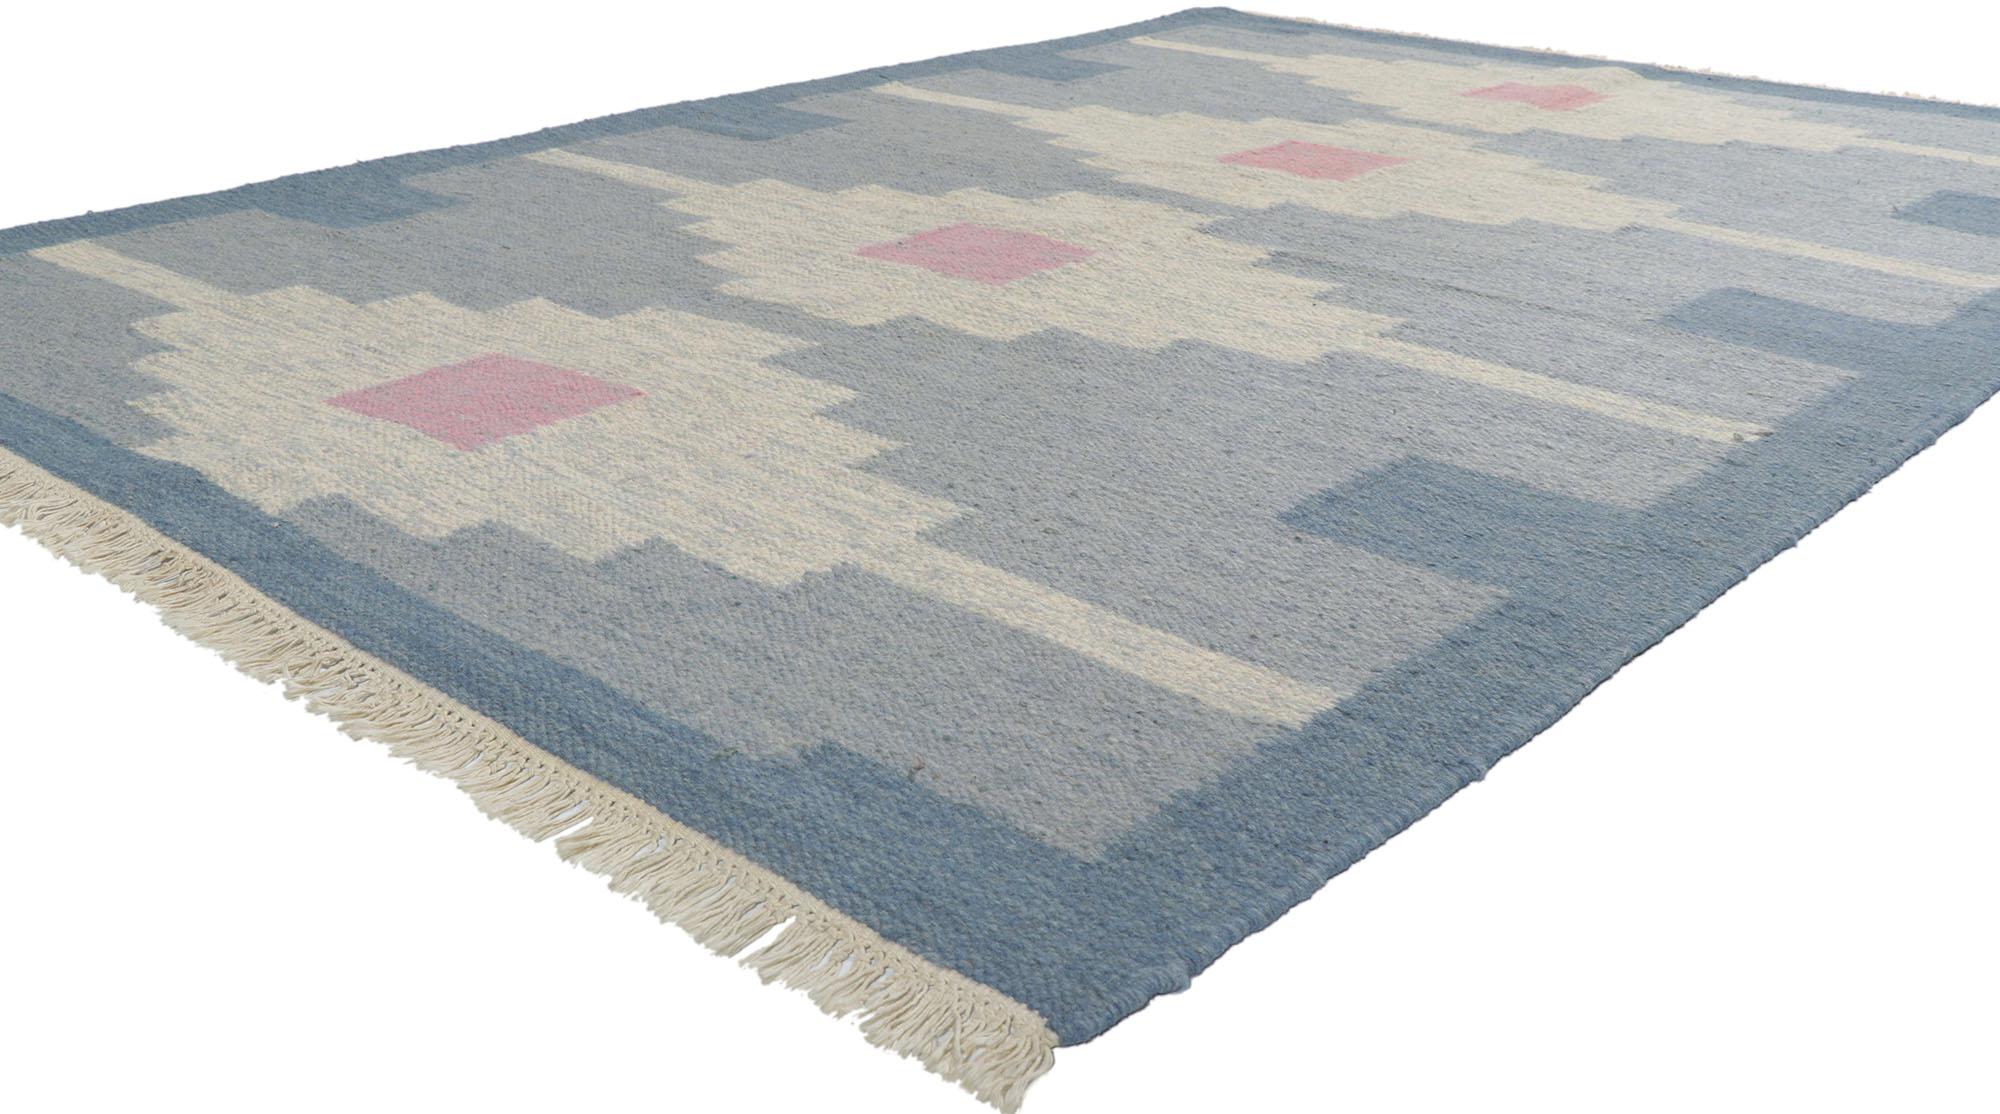 78264 vintage Swedish Rollakan rug with Scandinavian Modern style 06'02 x 09'02. With its geometric design and bohemian hygge vibes, this hand-woven wool Swedish Kilim rug beautifully embodies the simplicity of Scandinavian modern style. Showcasing